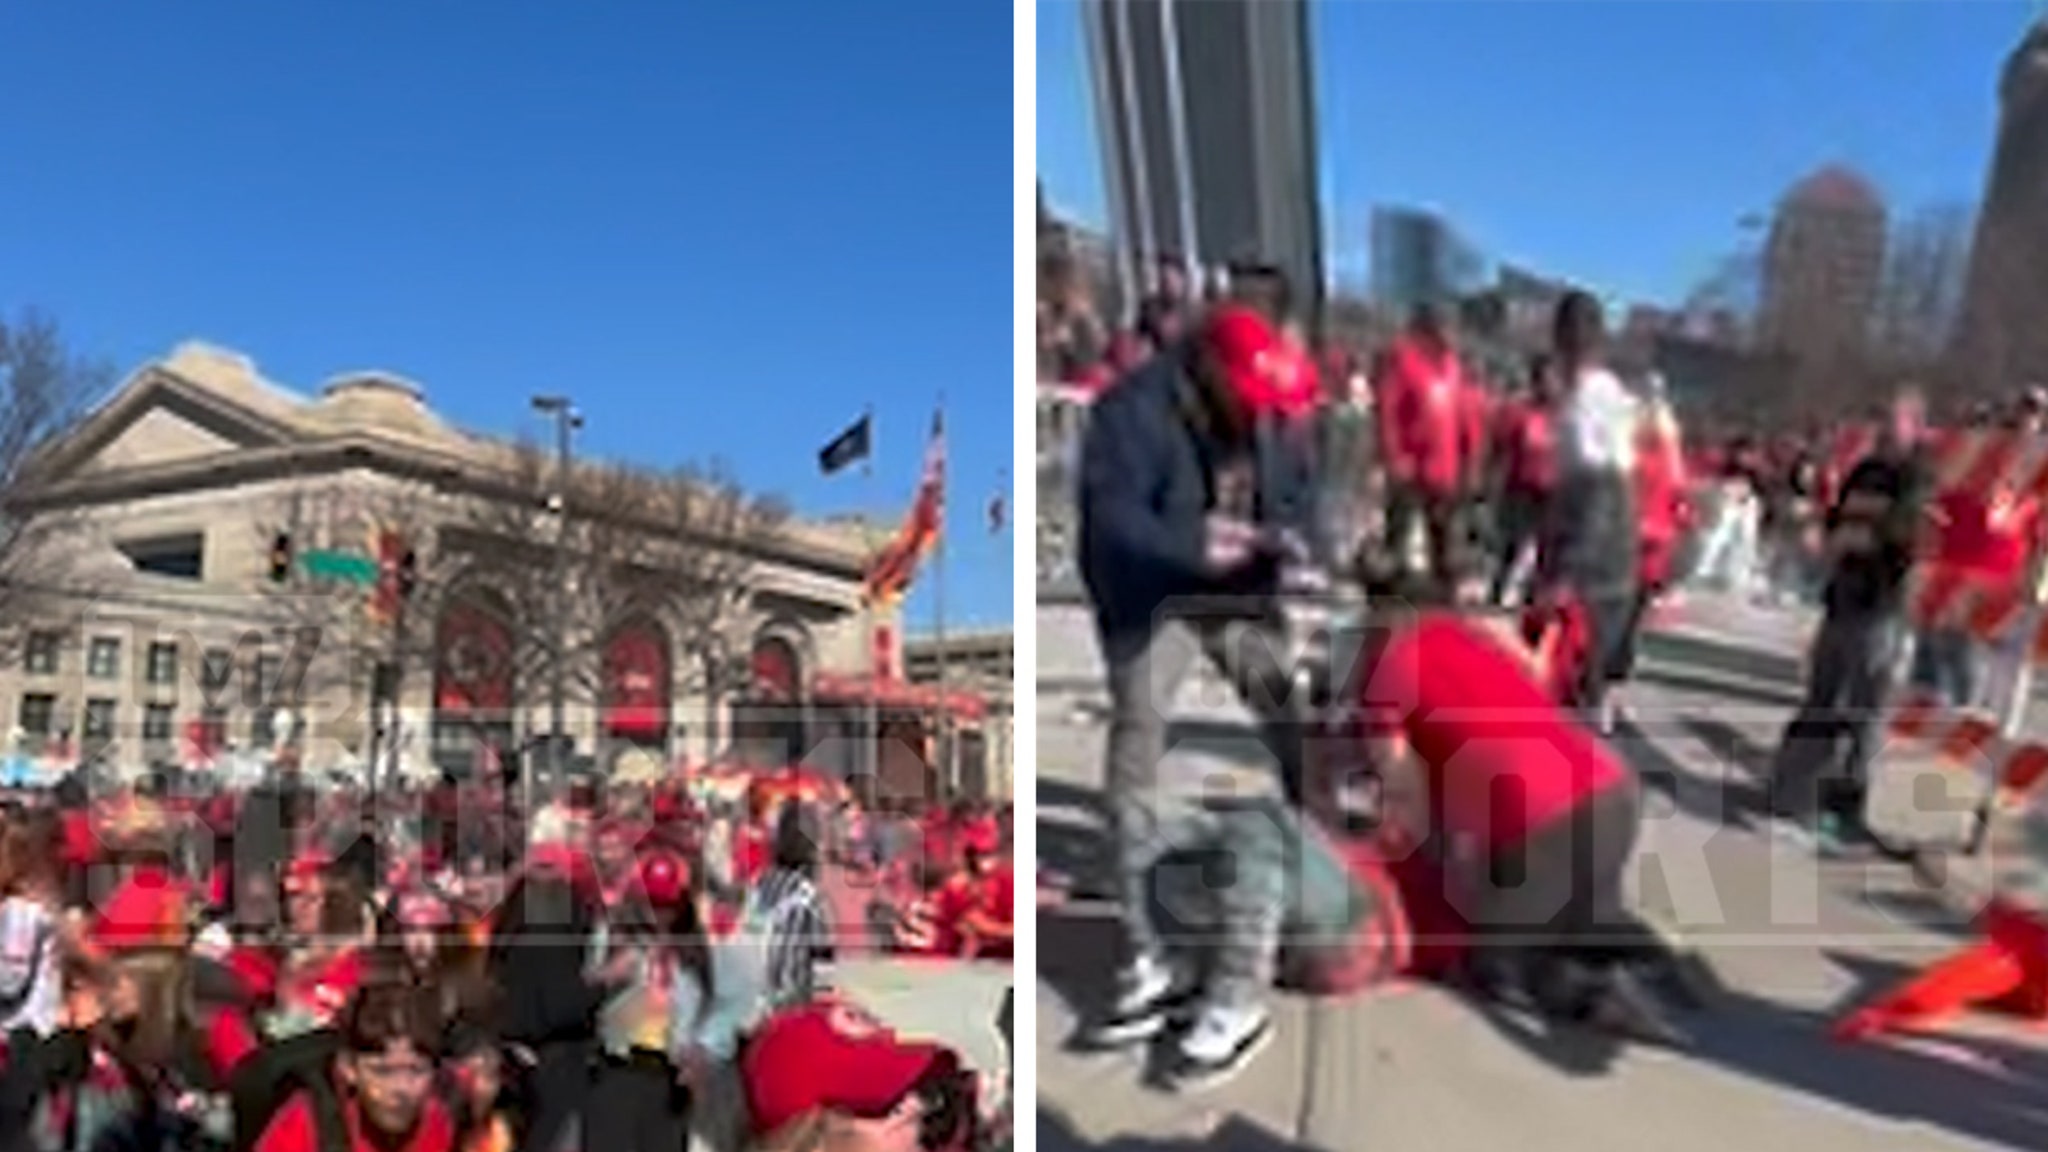 Video Of Gunfire at Chiefs Rally, AR-Style Rifle Seized & 22 Shot Victims